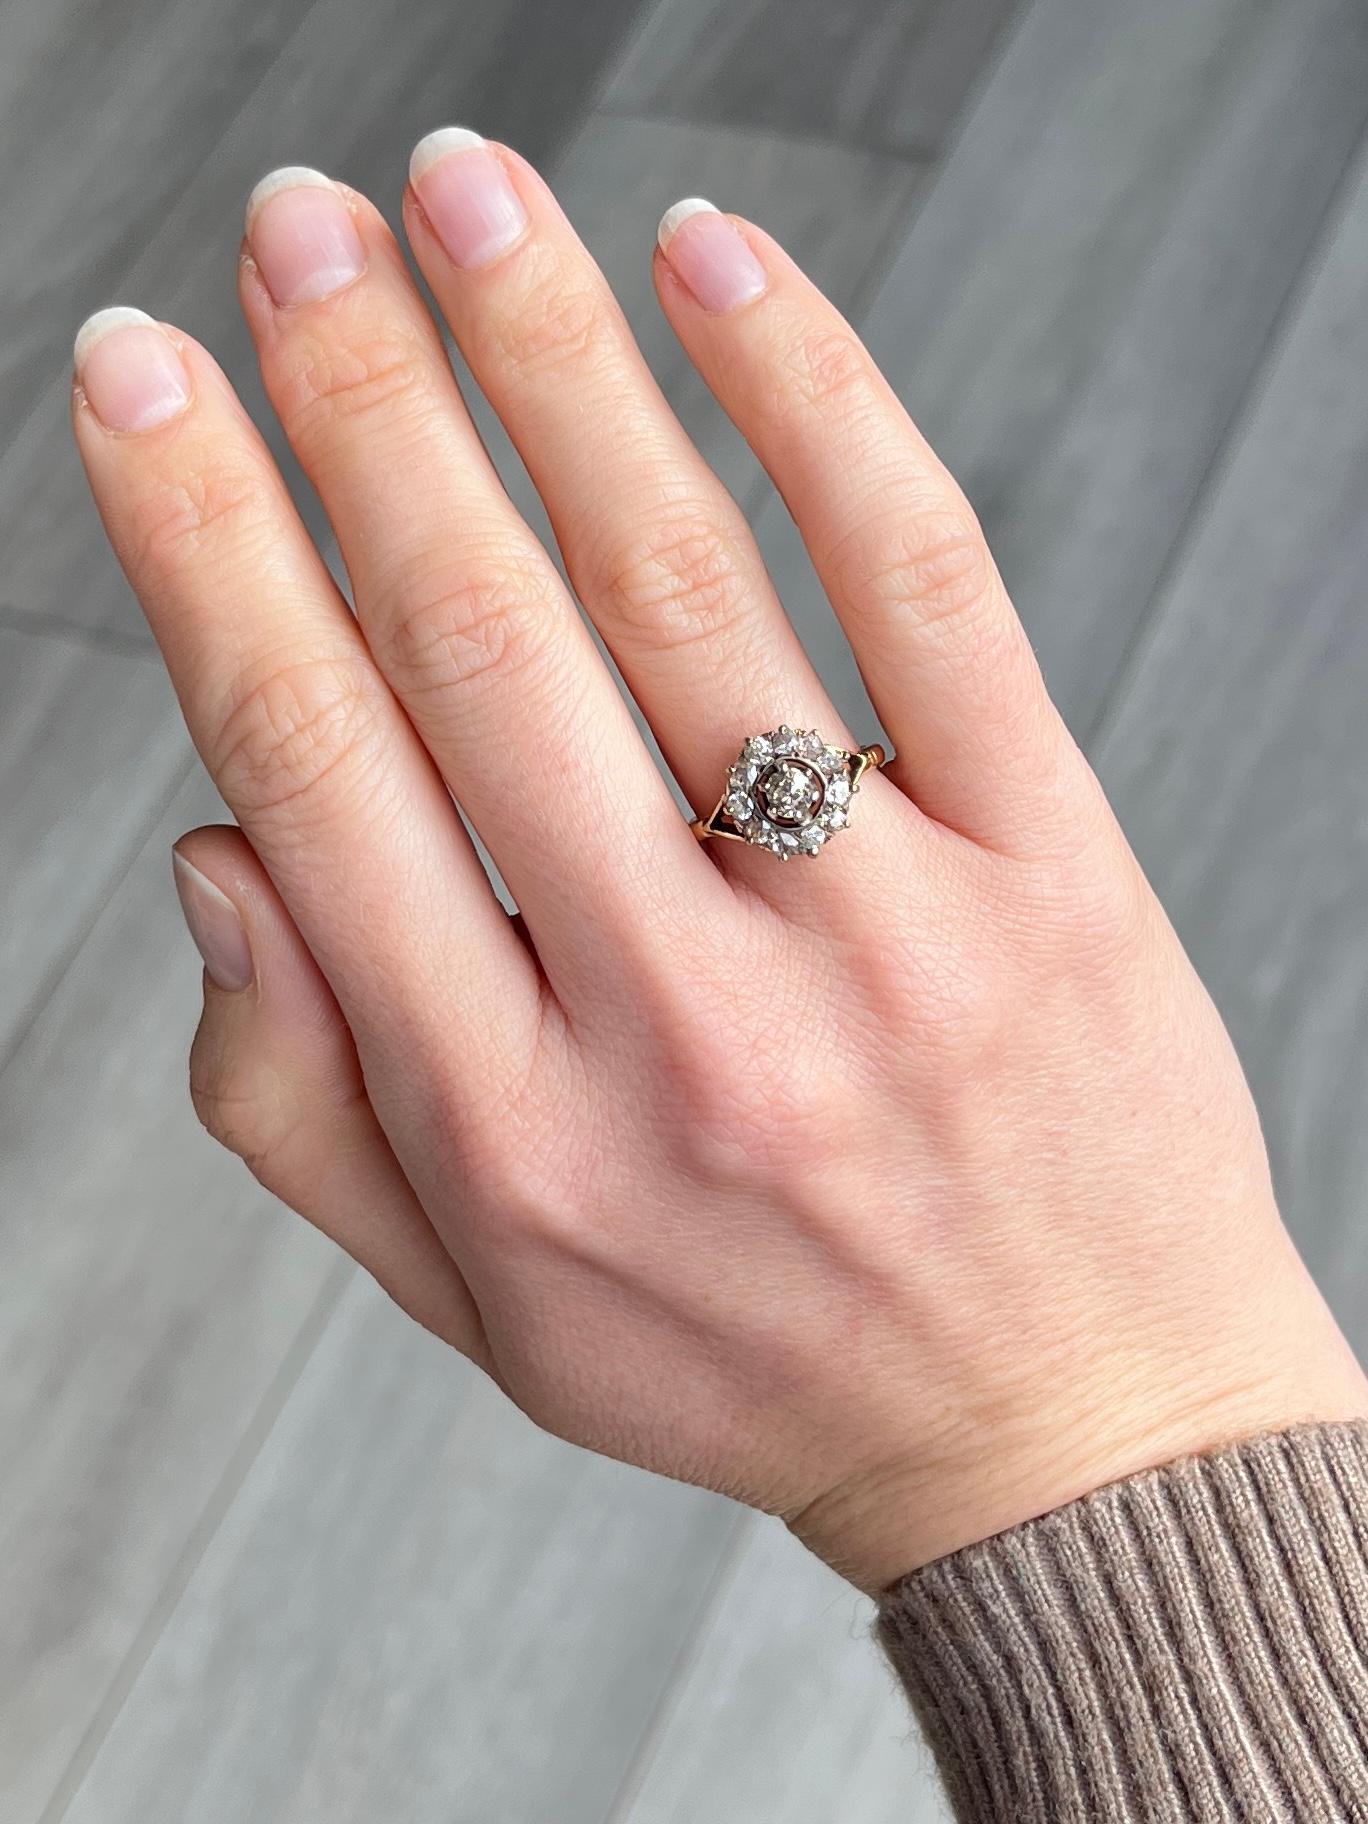 This stunning cluster ring holds old mine cut diamonds set within the platinum setting. The central stone measures approx 30pts and is surrounded by a halo of smaller old mine cut diamonds. The head is sat on a simple 18carat gold band with split